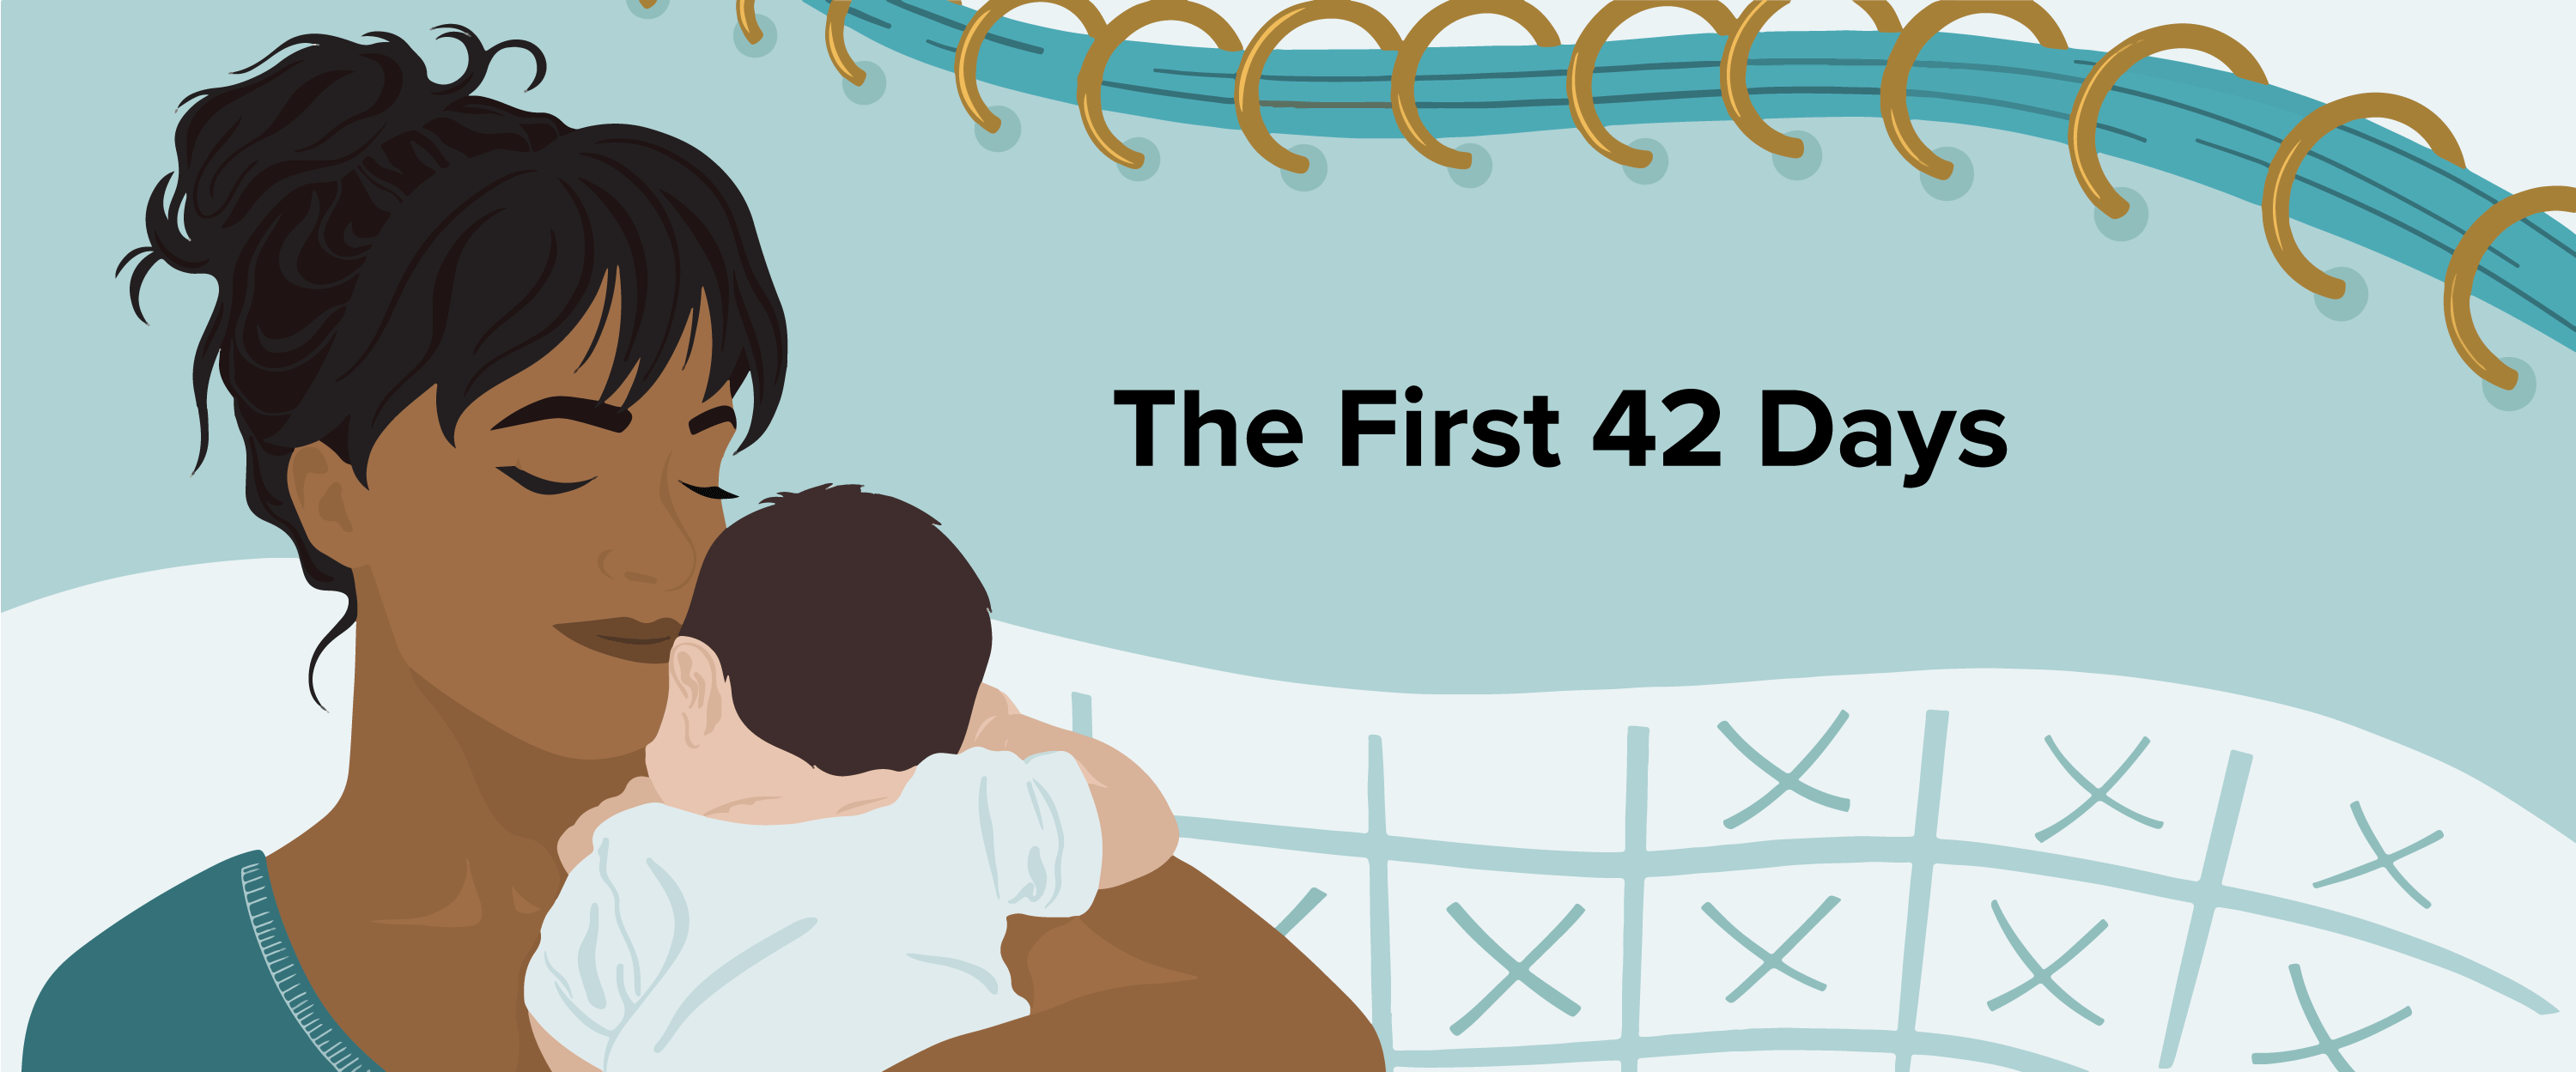 The First 42 Days